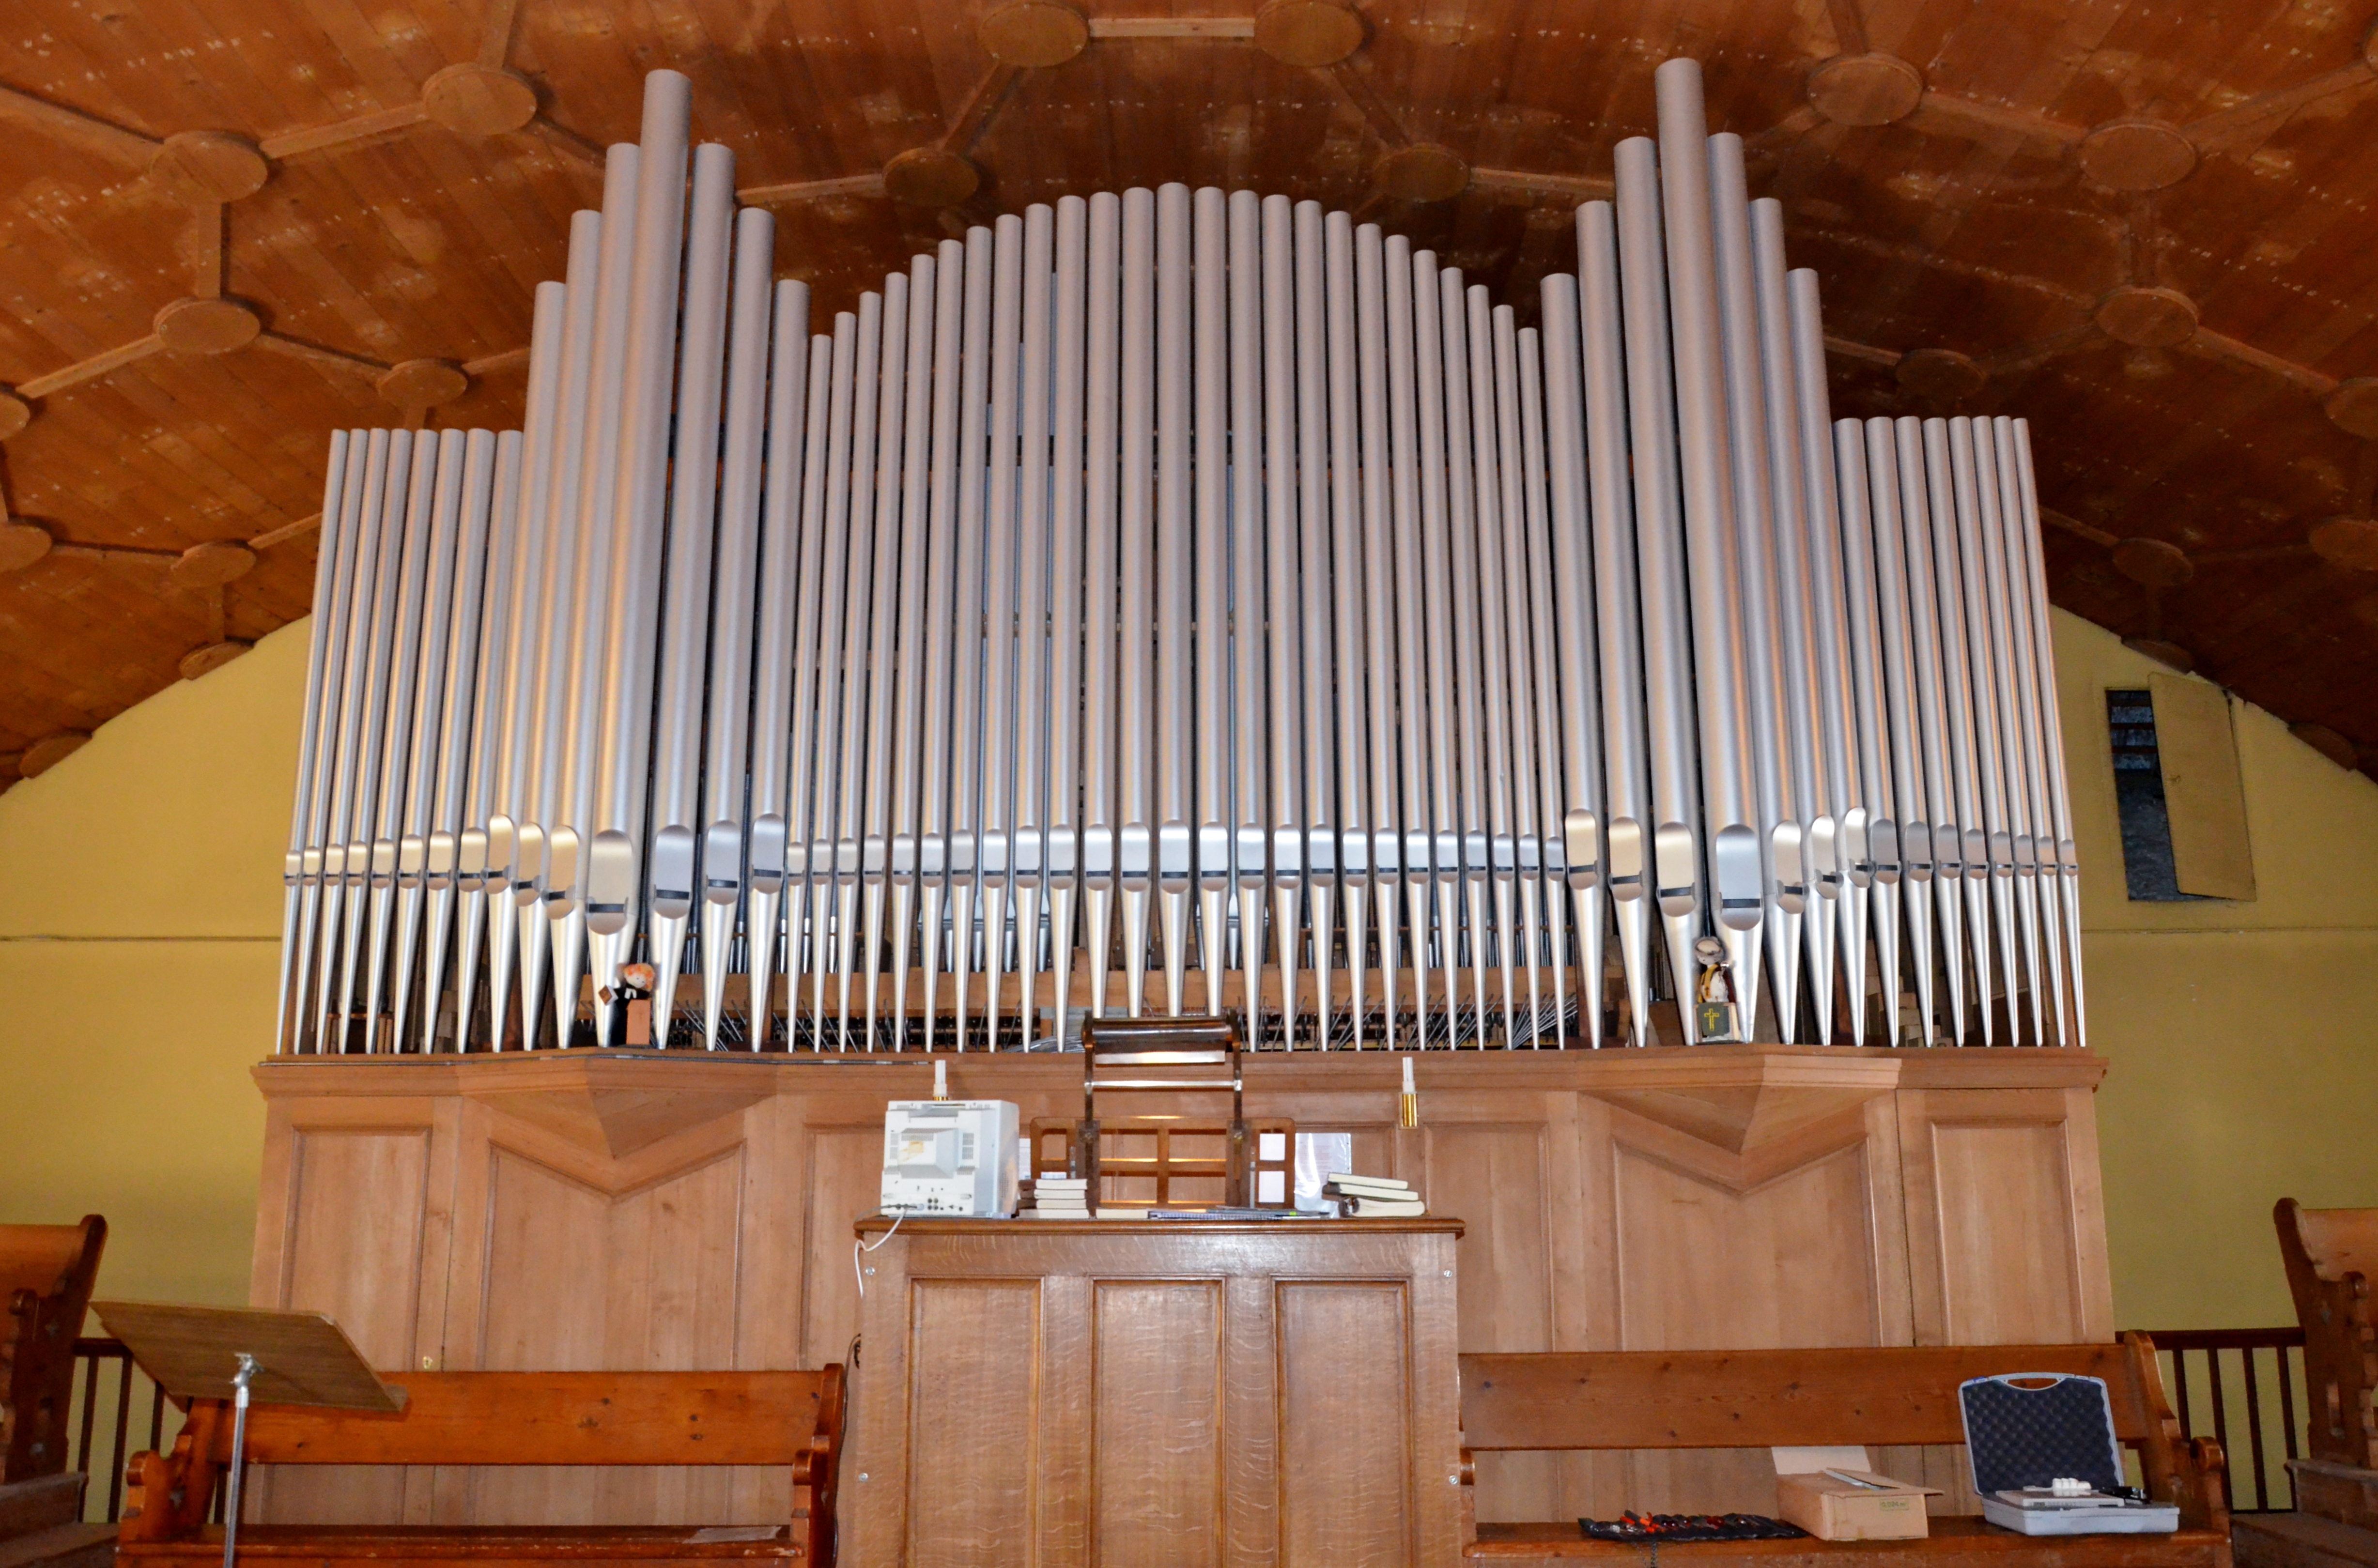 Bex organ with pipes directly exposed to the viewer